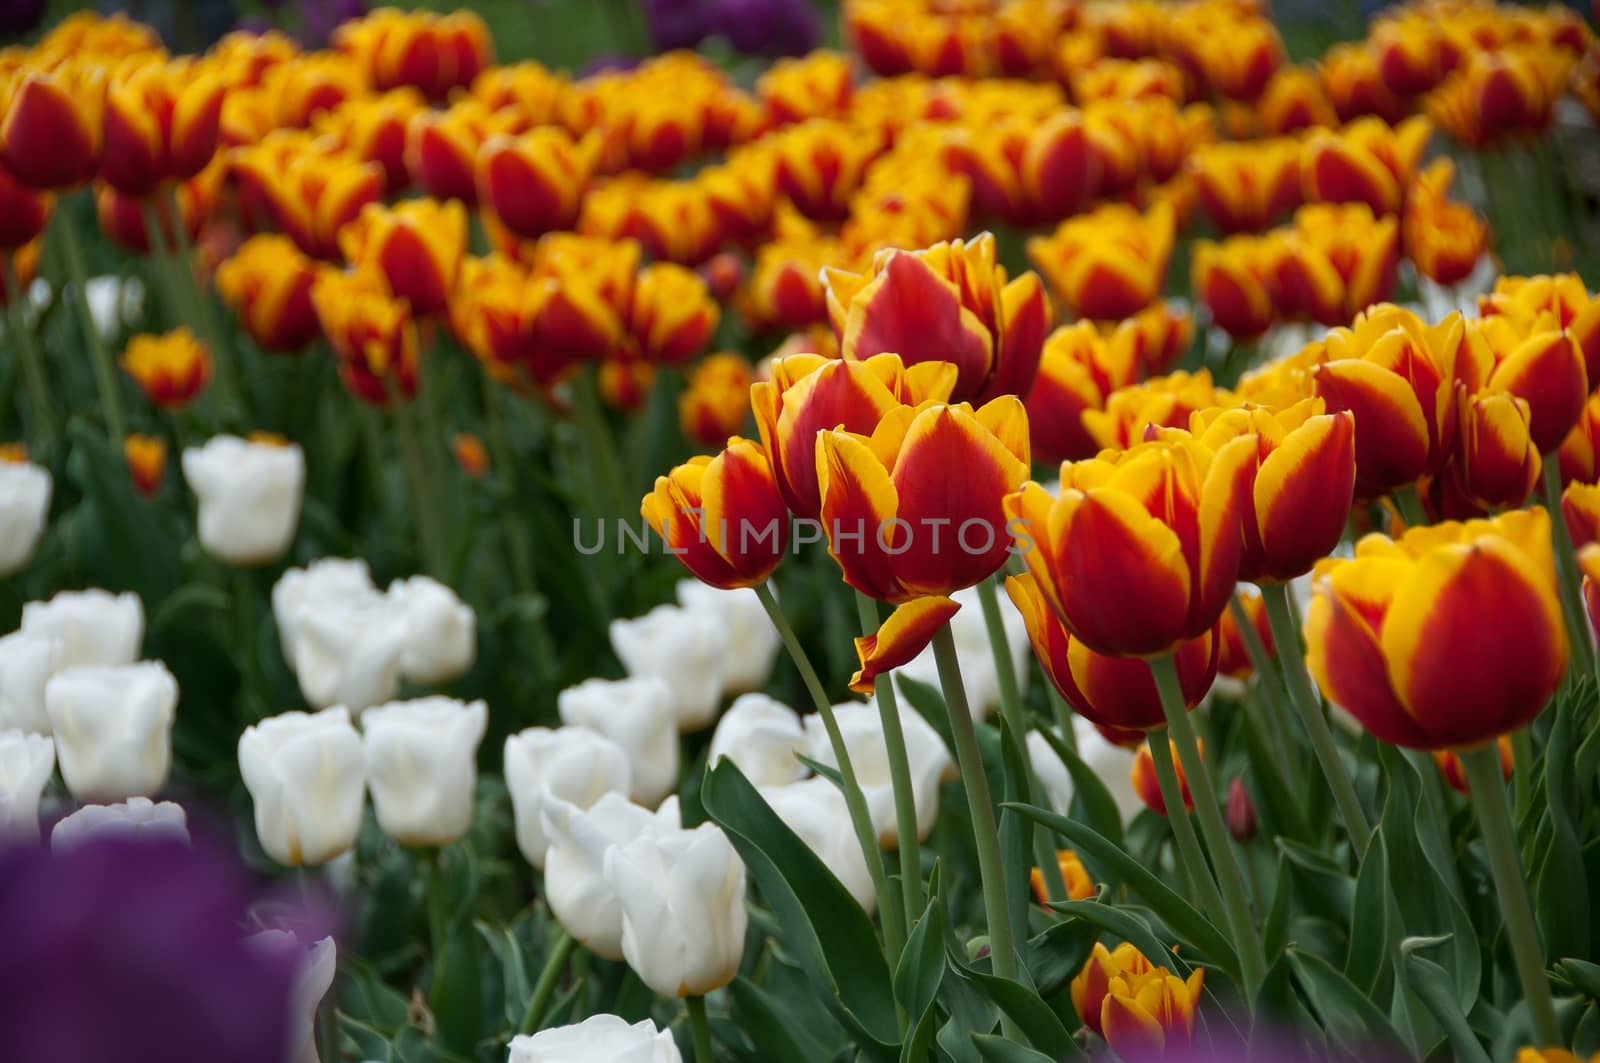 Field of colorful tulips in spring by asafaric